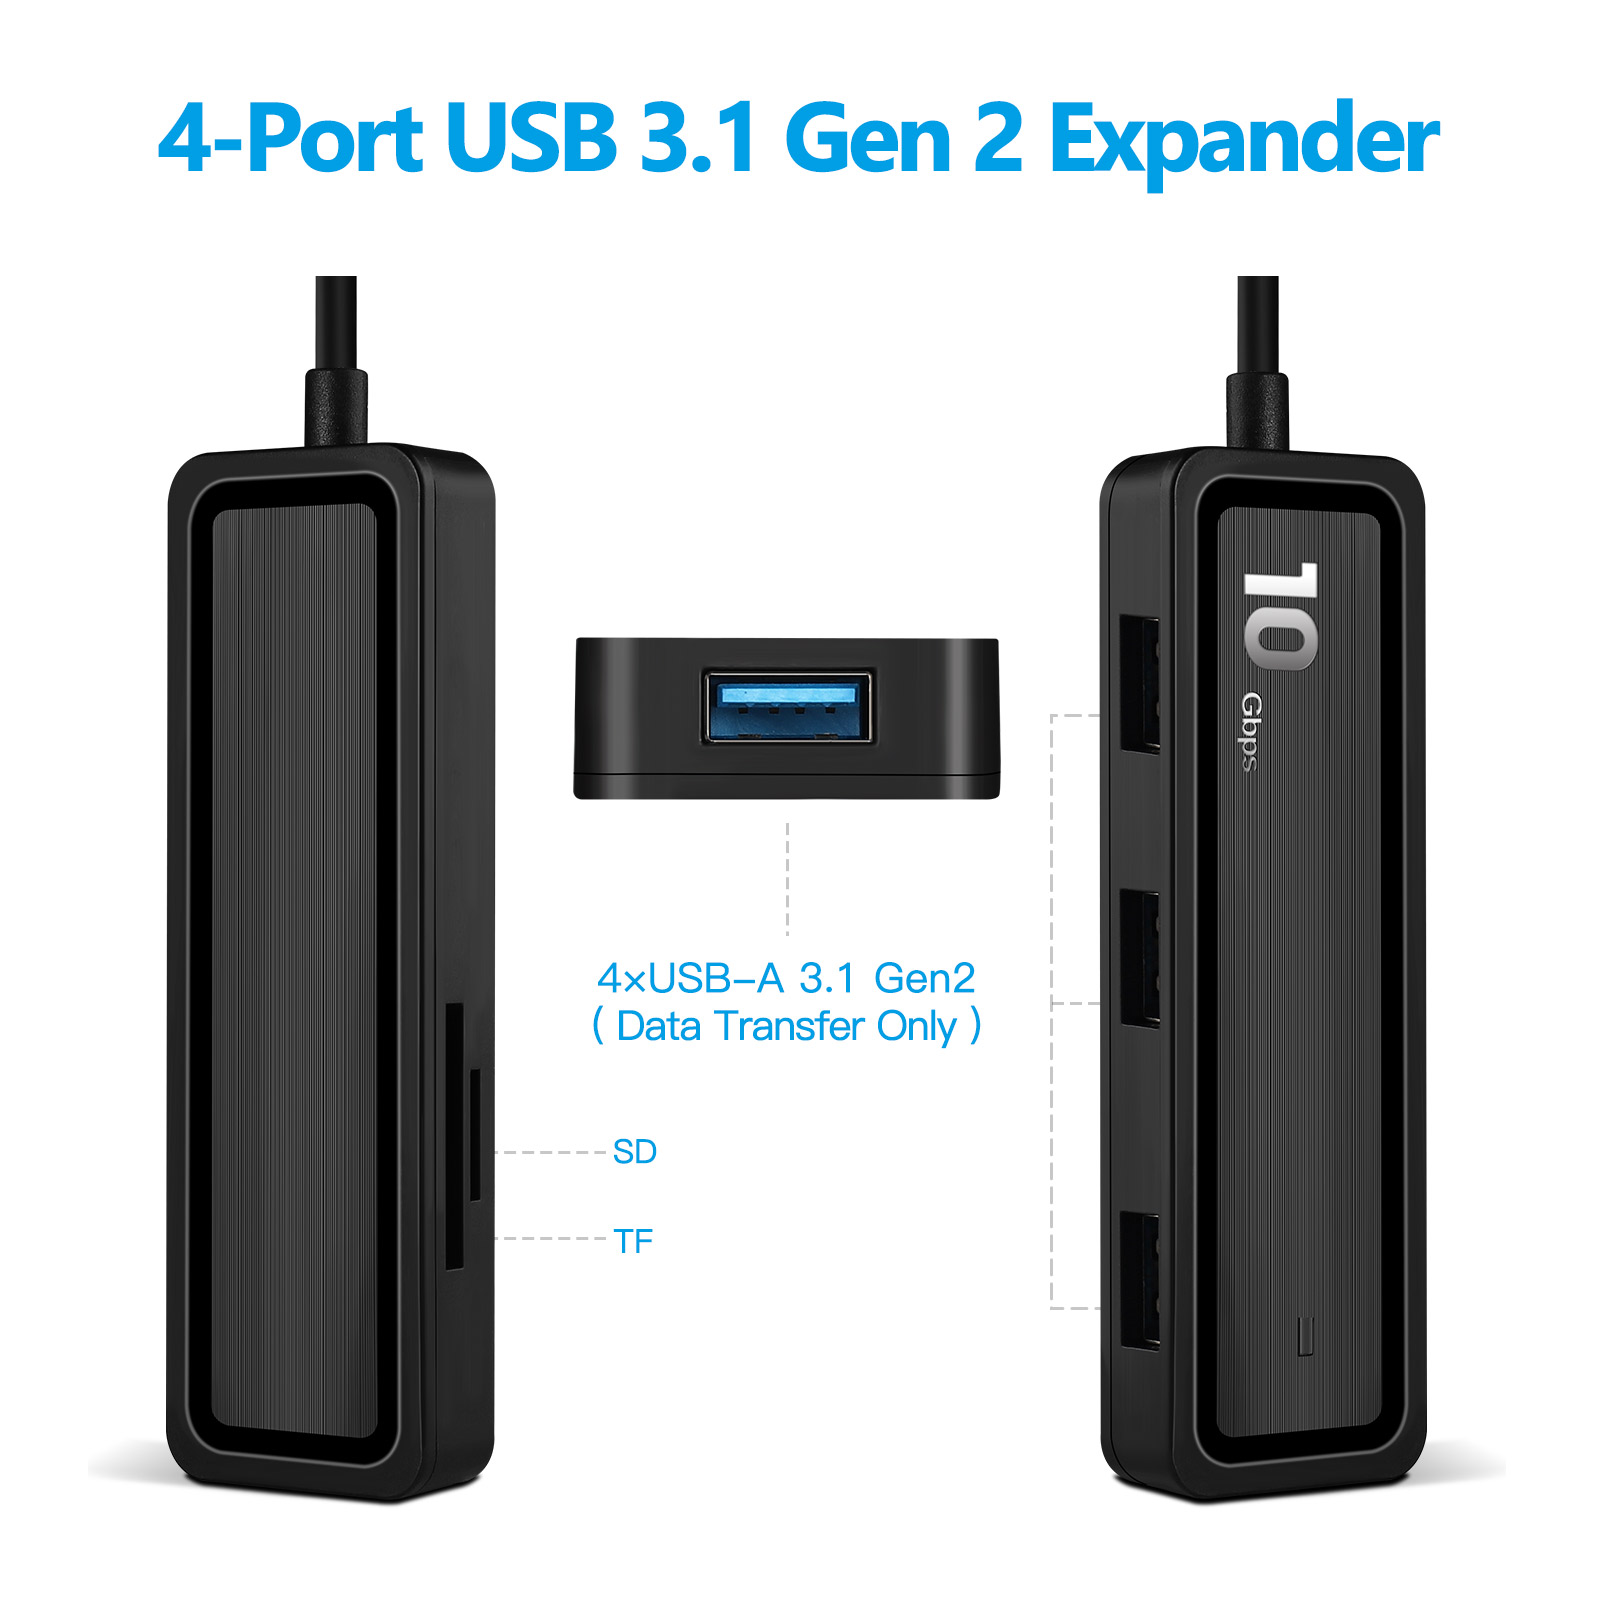 Pinrui-6-in-1-USB-Hub-4-Port-USB31-Gen-2-Expander-with-SD-TF-Adapter-Laptop-Docking-Station-1951382-8